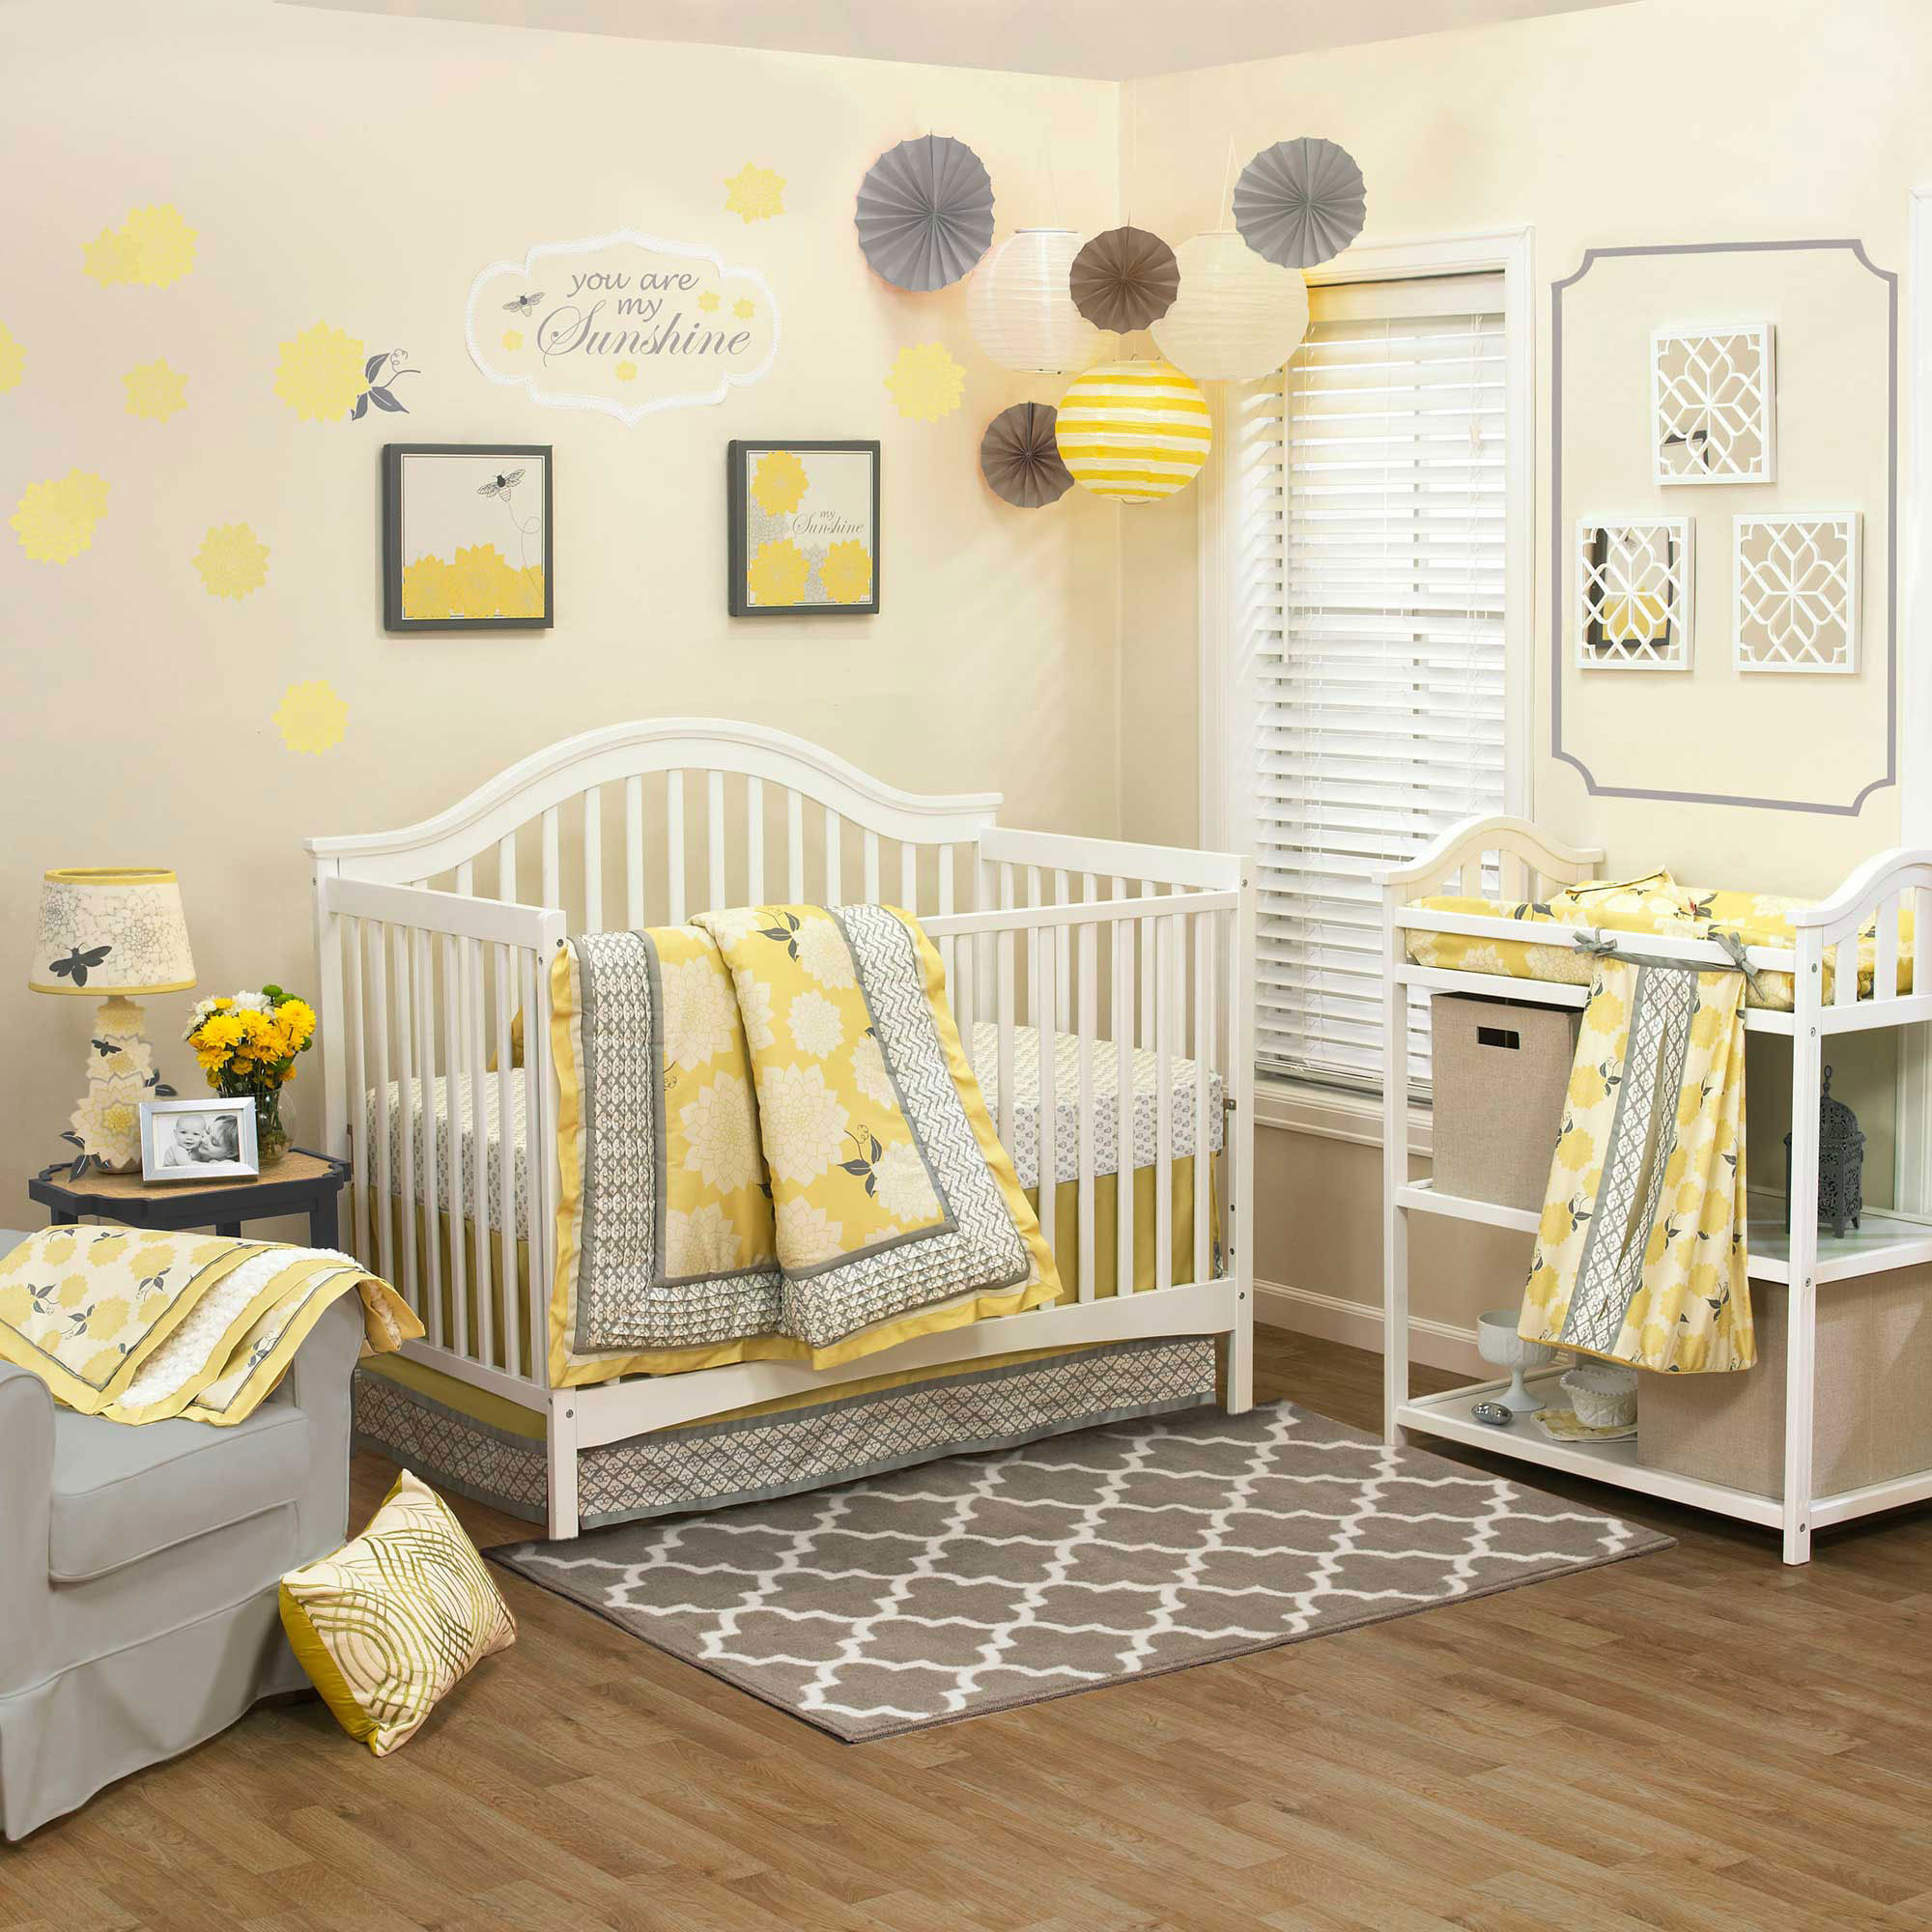 Baby Girl Room Decorations Ideas
 Baby Girl Nursery Ideas 10 Pretty Examples Decorating Room